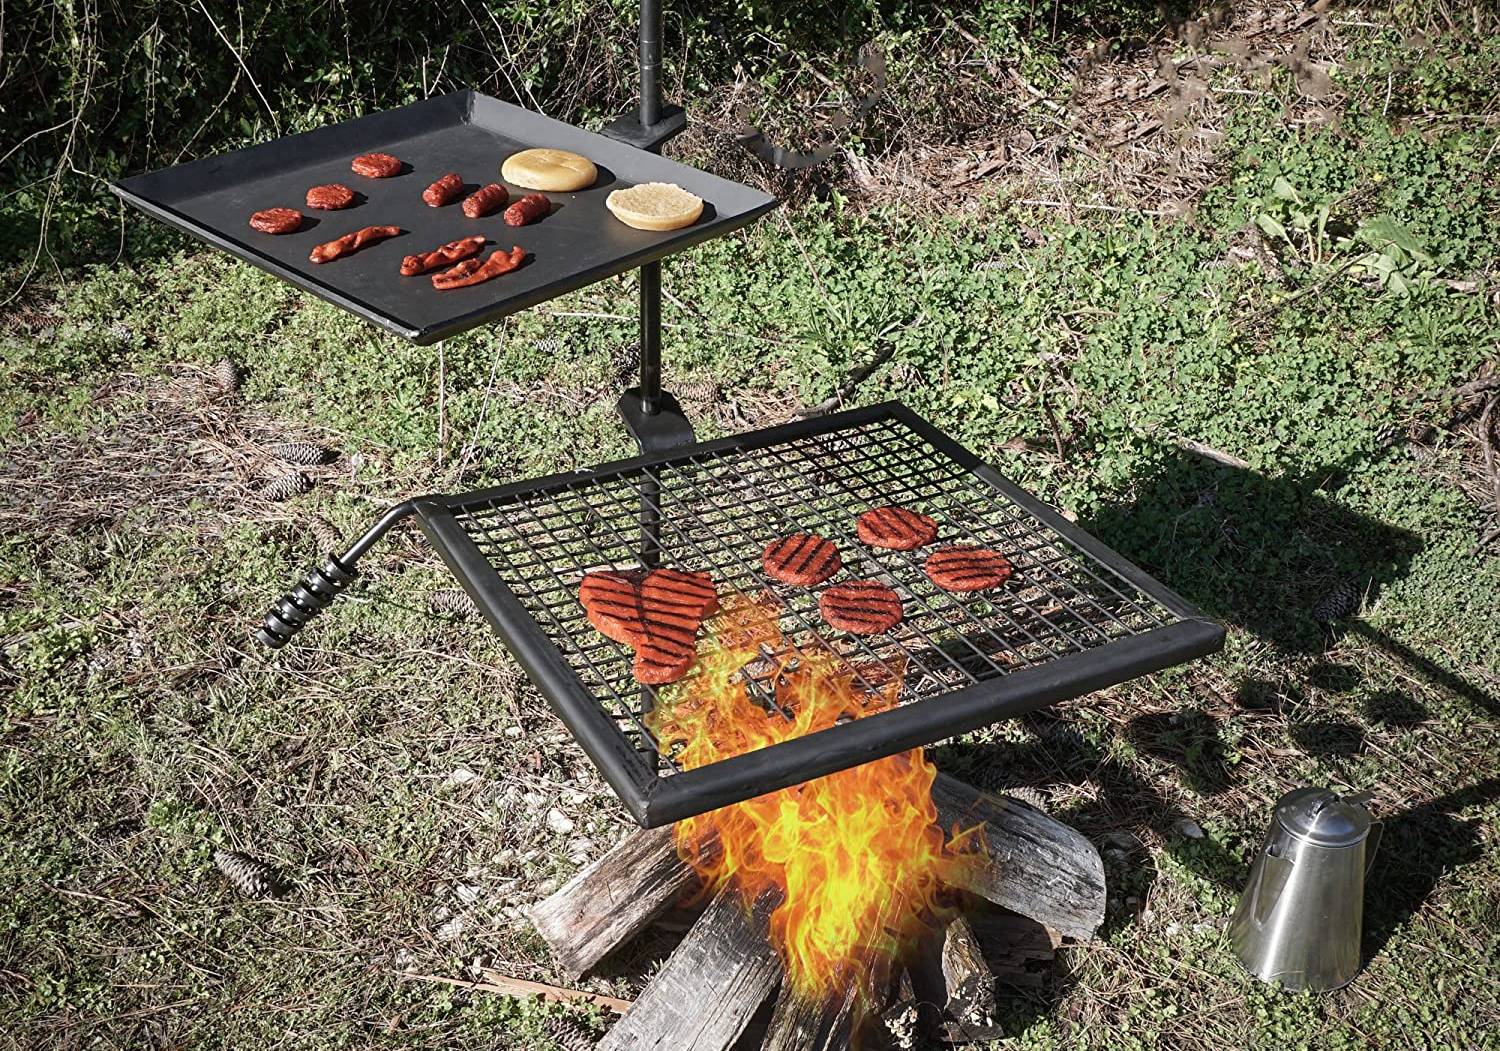 The Top 7 Fire Pit Grill Posts Compared